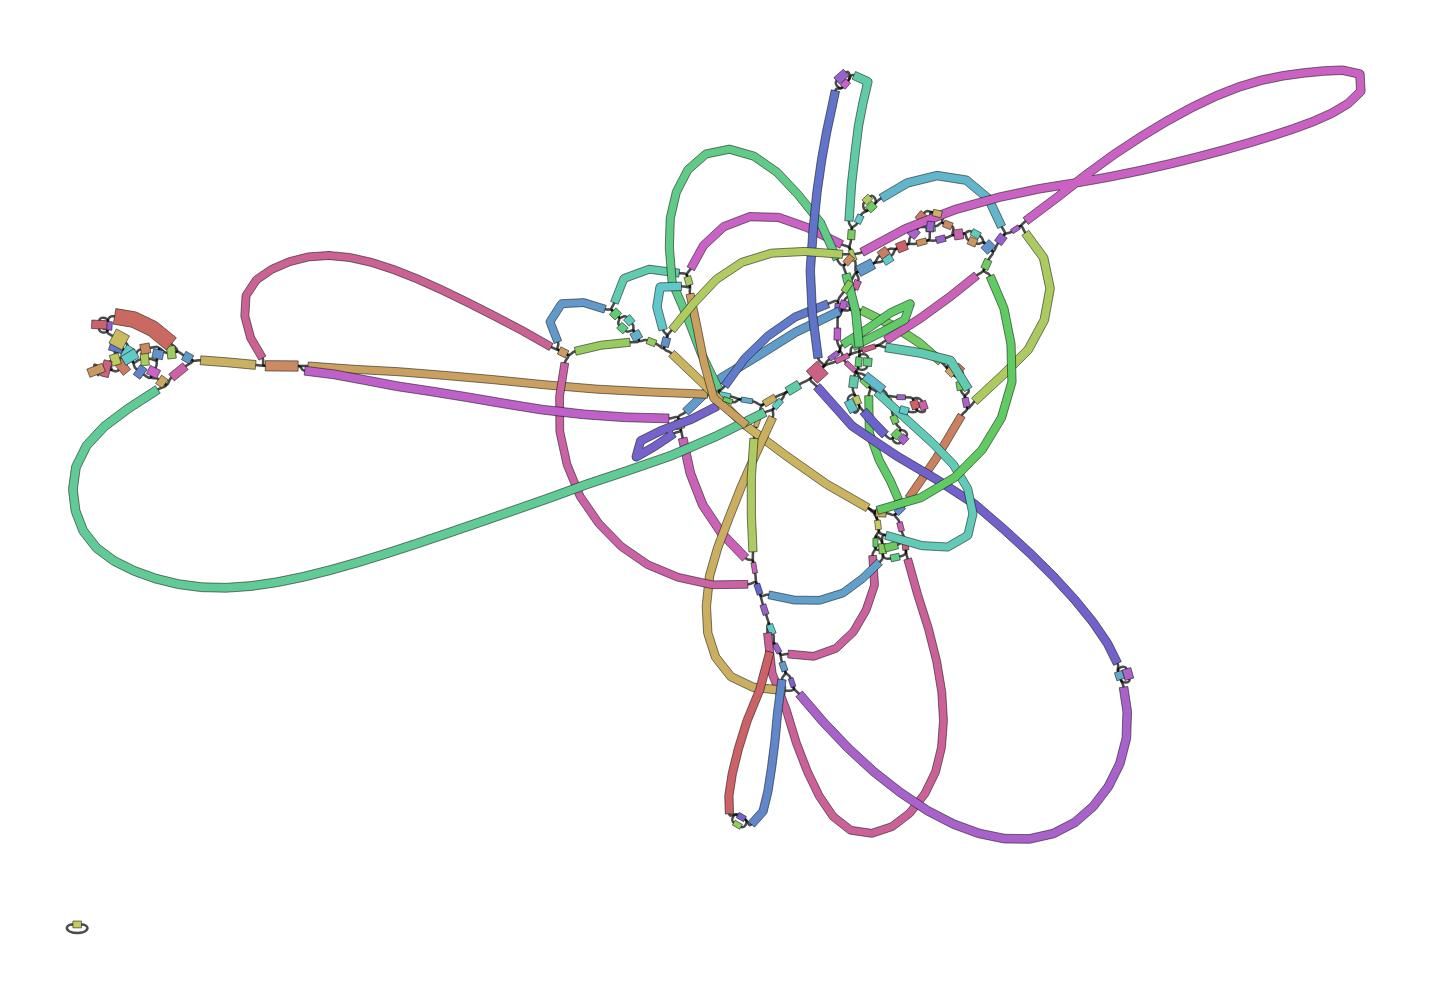 Bandage output showing a mess of a genome graph. 